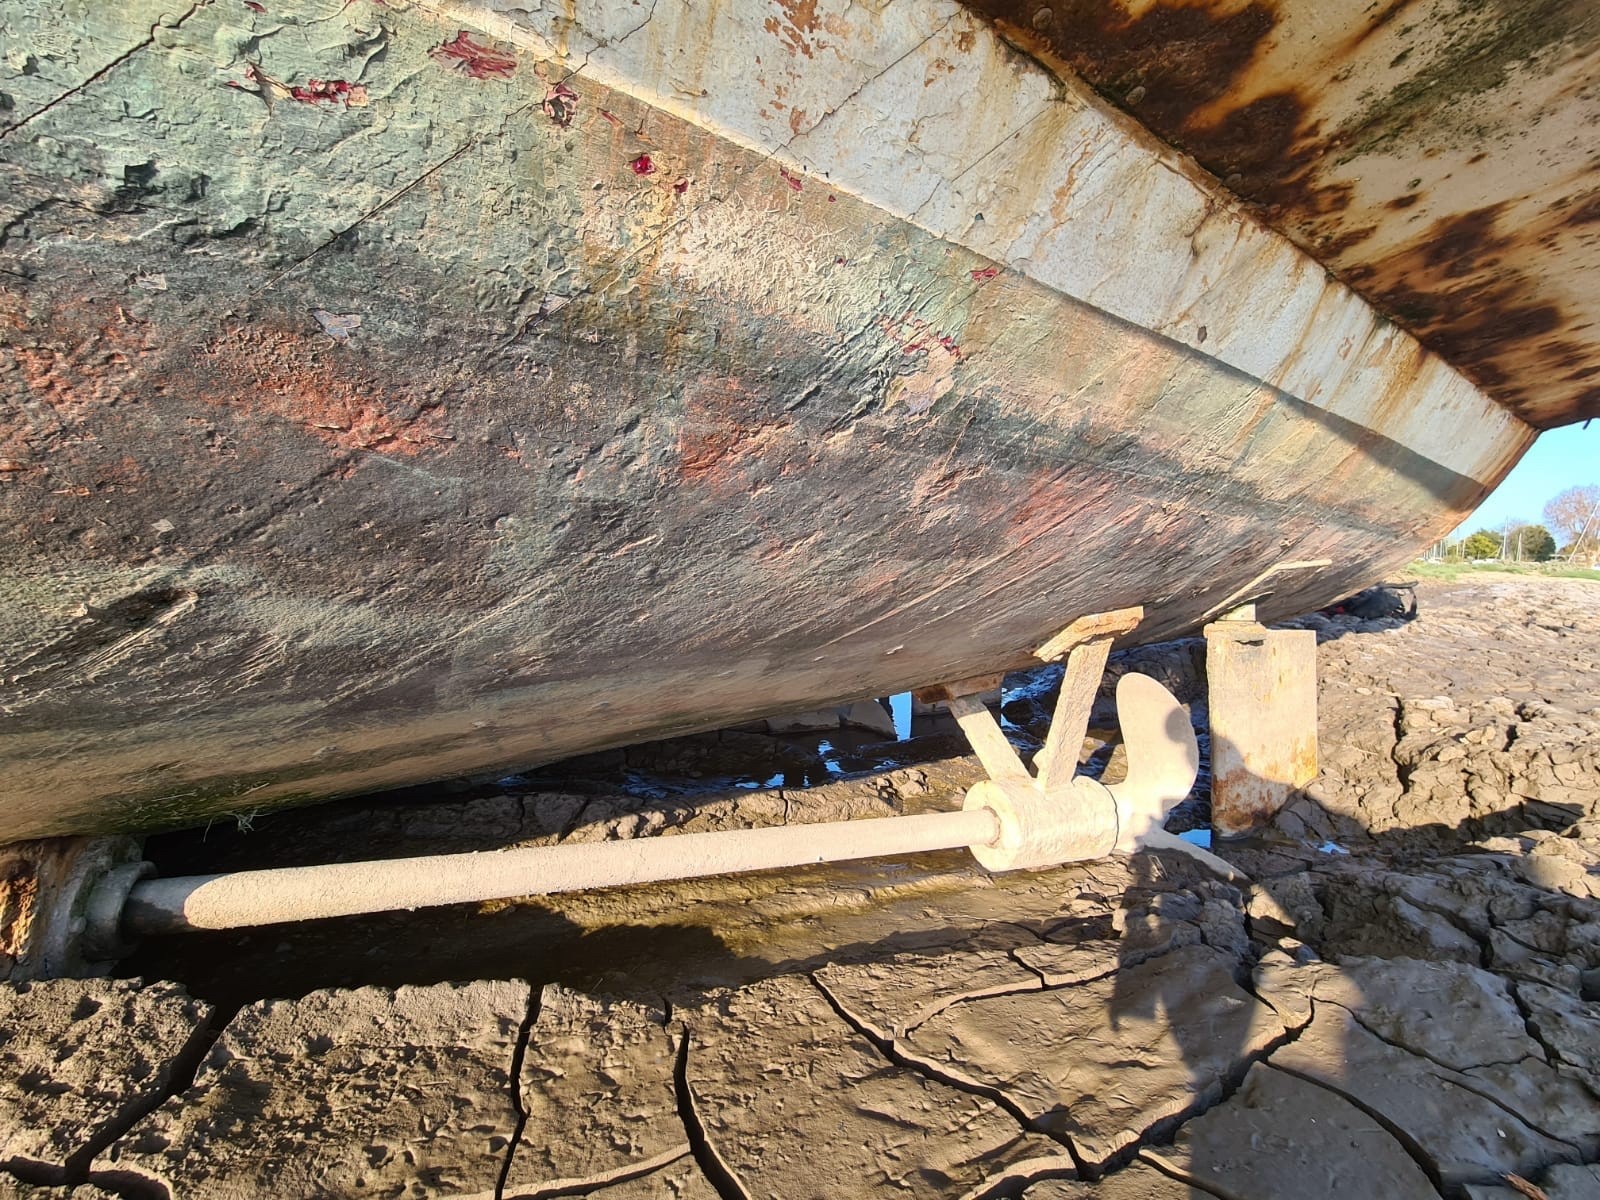 Latest photos from the Robins family who are restoring a WW2 warship